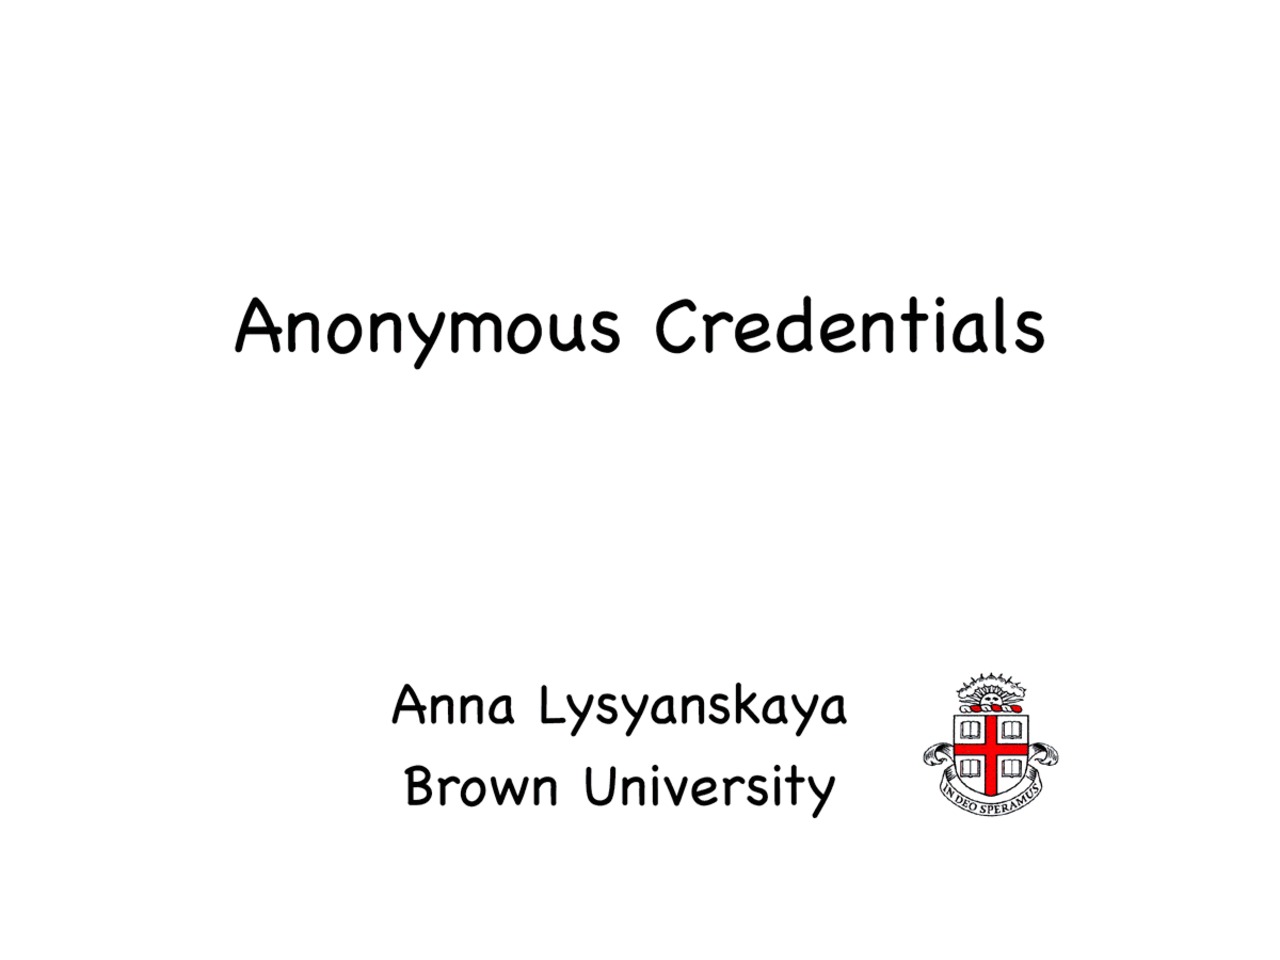 STPPA4 Talk 1: Anonymous Credentials